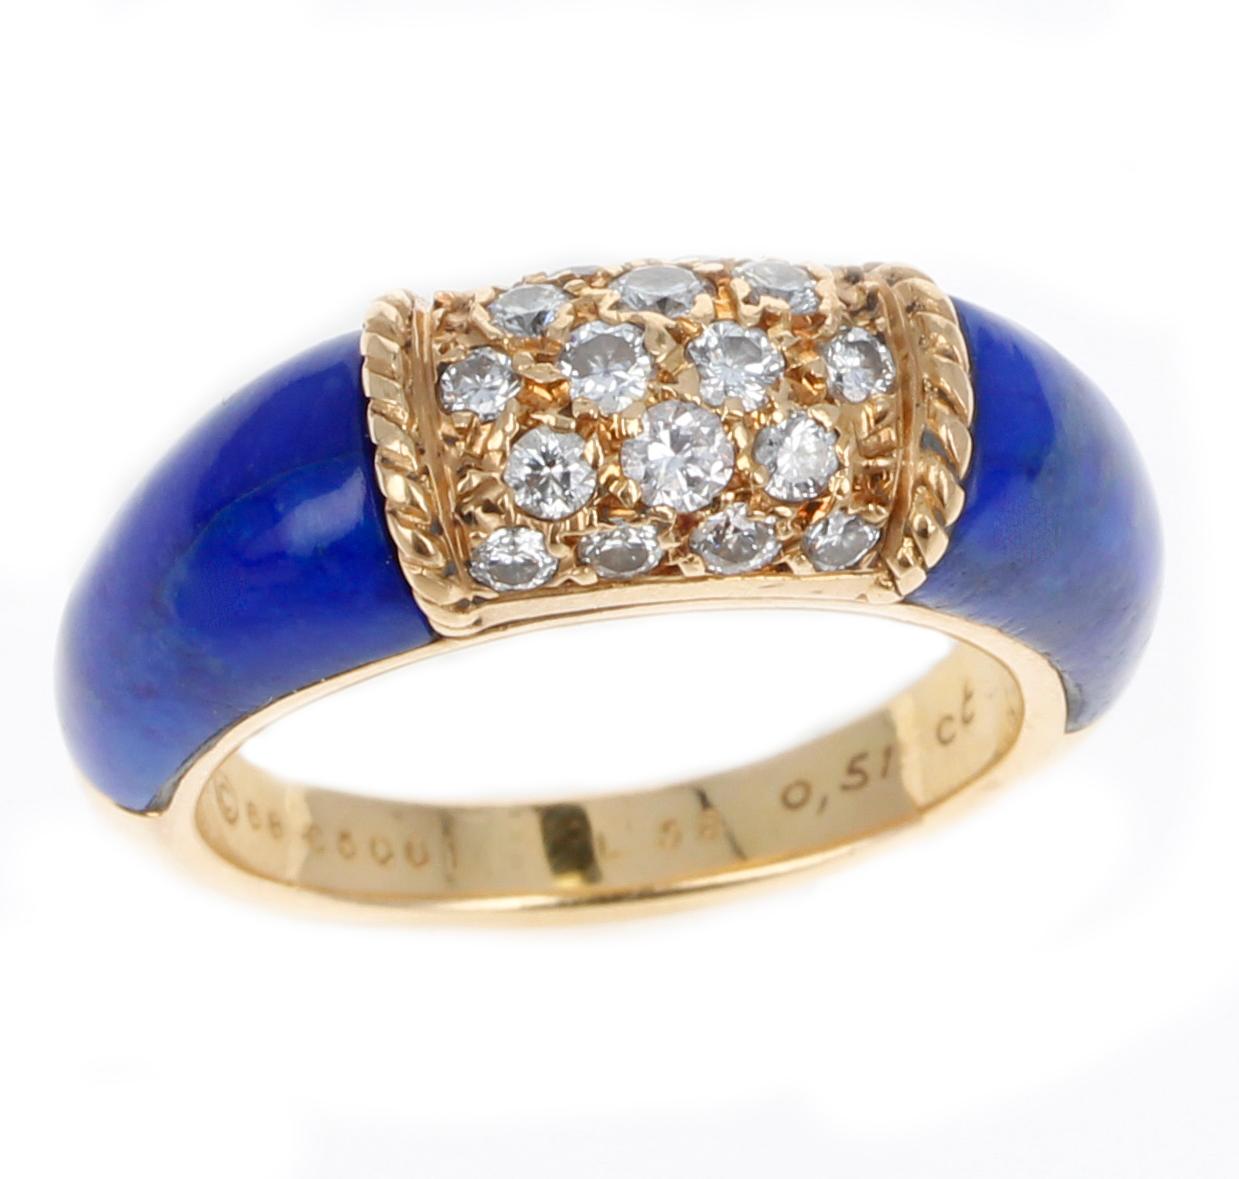 A Van Cleef & Arpels Ring with Two Carved Lapis Inlays and 5 Row Diamond Stacking Philippine Ring made in 18K Yellow Gold. There are 5 rows of diamonds, totaling to 15 round diamonds. The total weight is 7.68 grams. 